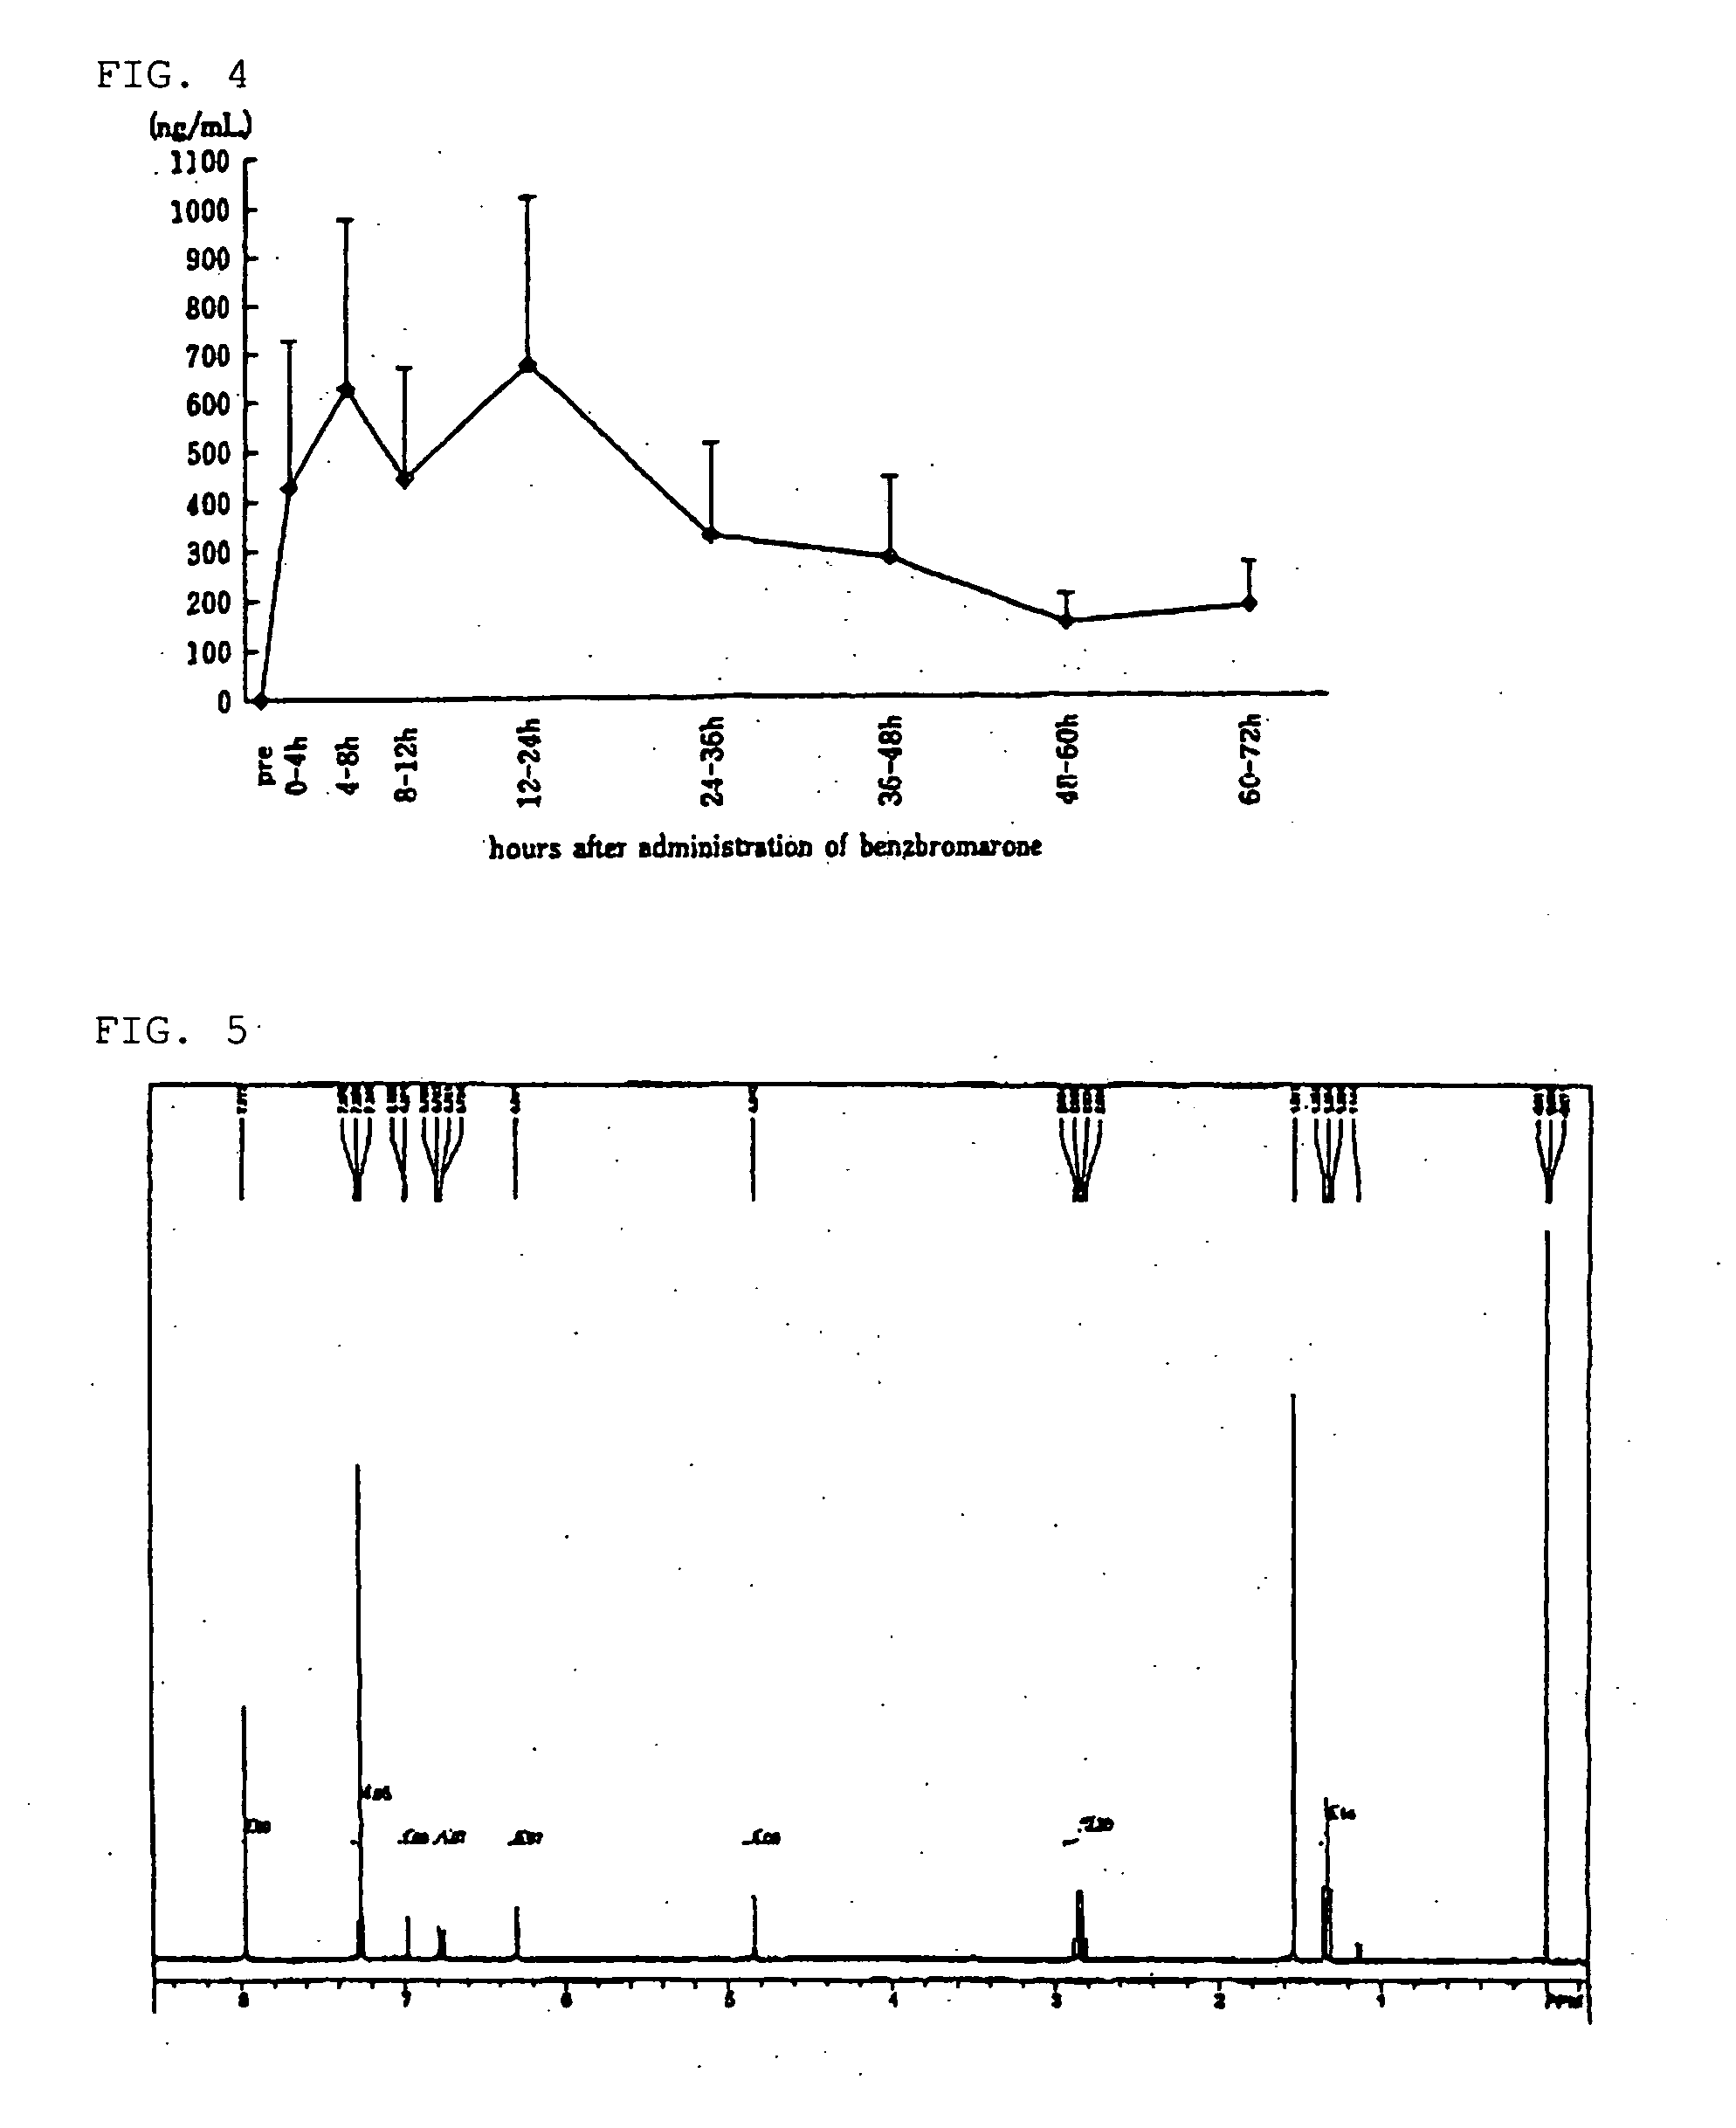 Medicinal compositions containing 6-hydroxybenzbromarone or salts thereof